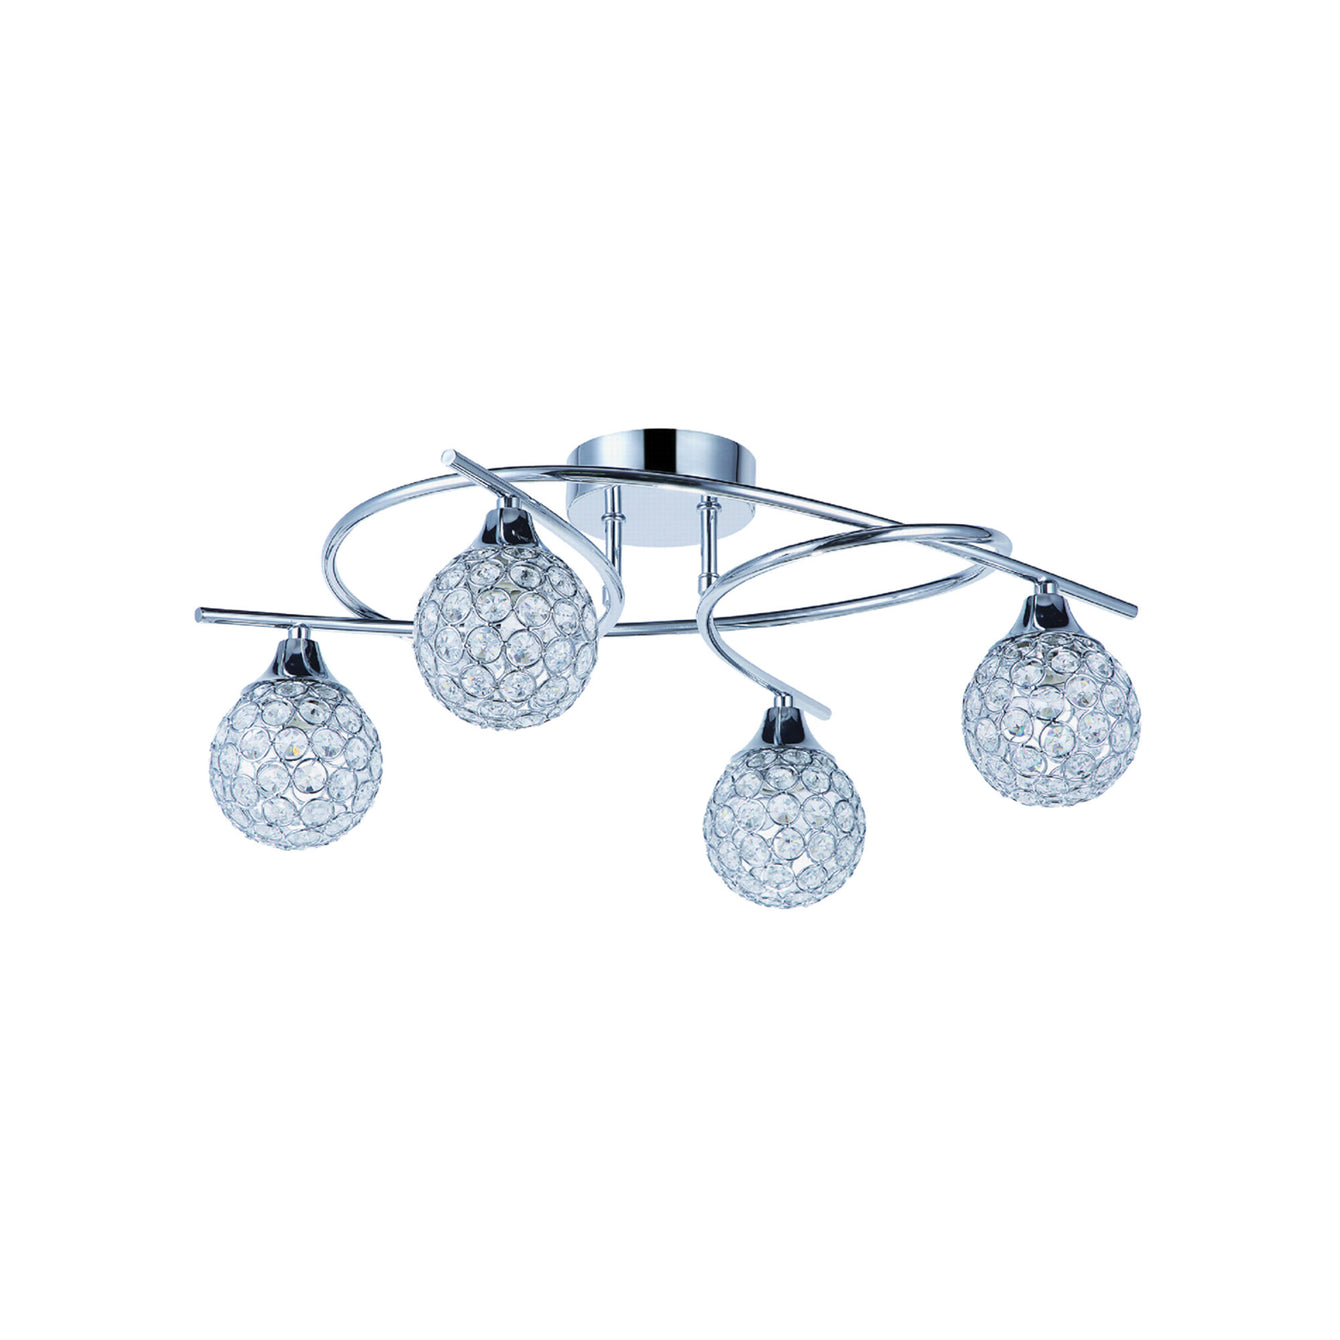 Osterley 4, 5, 6 and 6 plus 6 Arm Pendant LED Light - Buy It Better 4 Arm